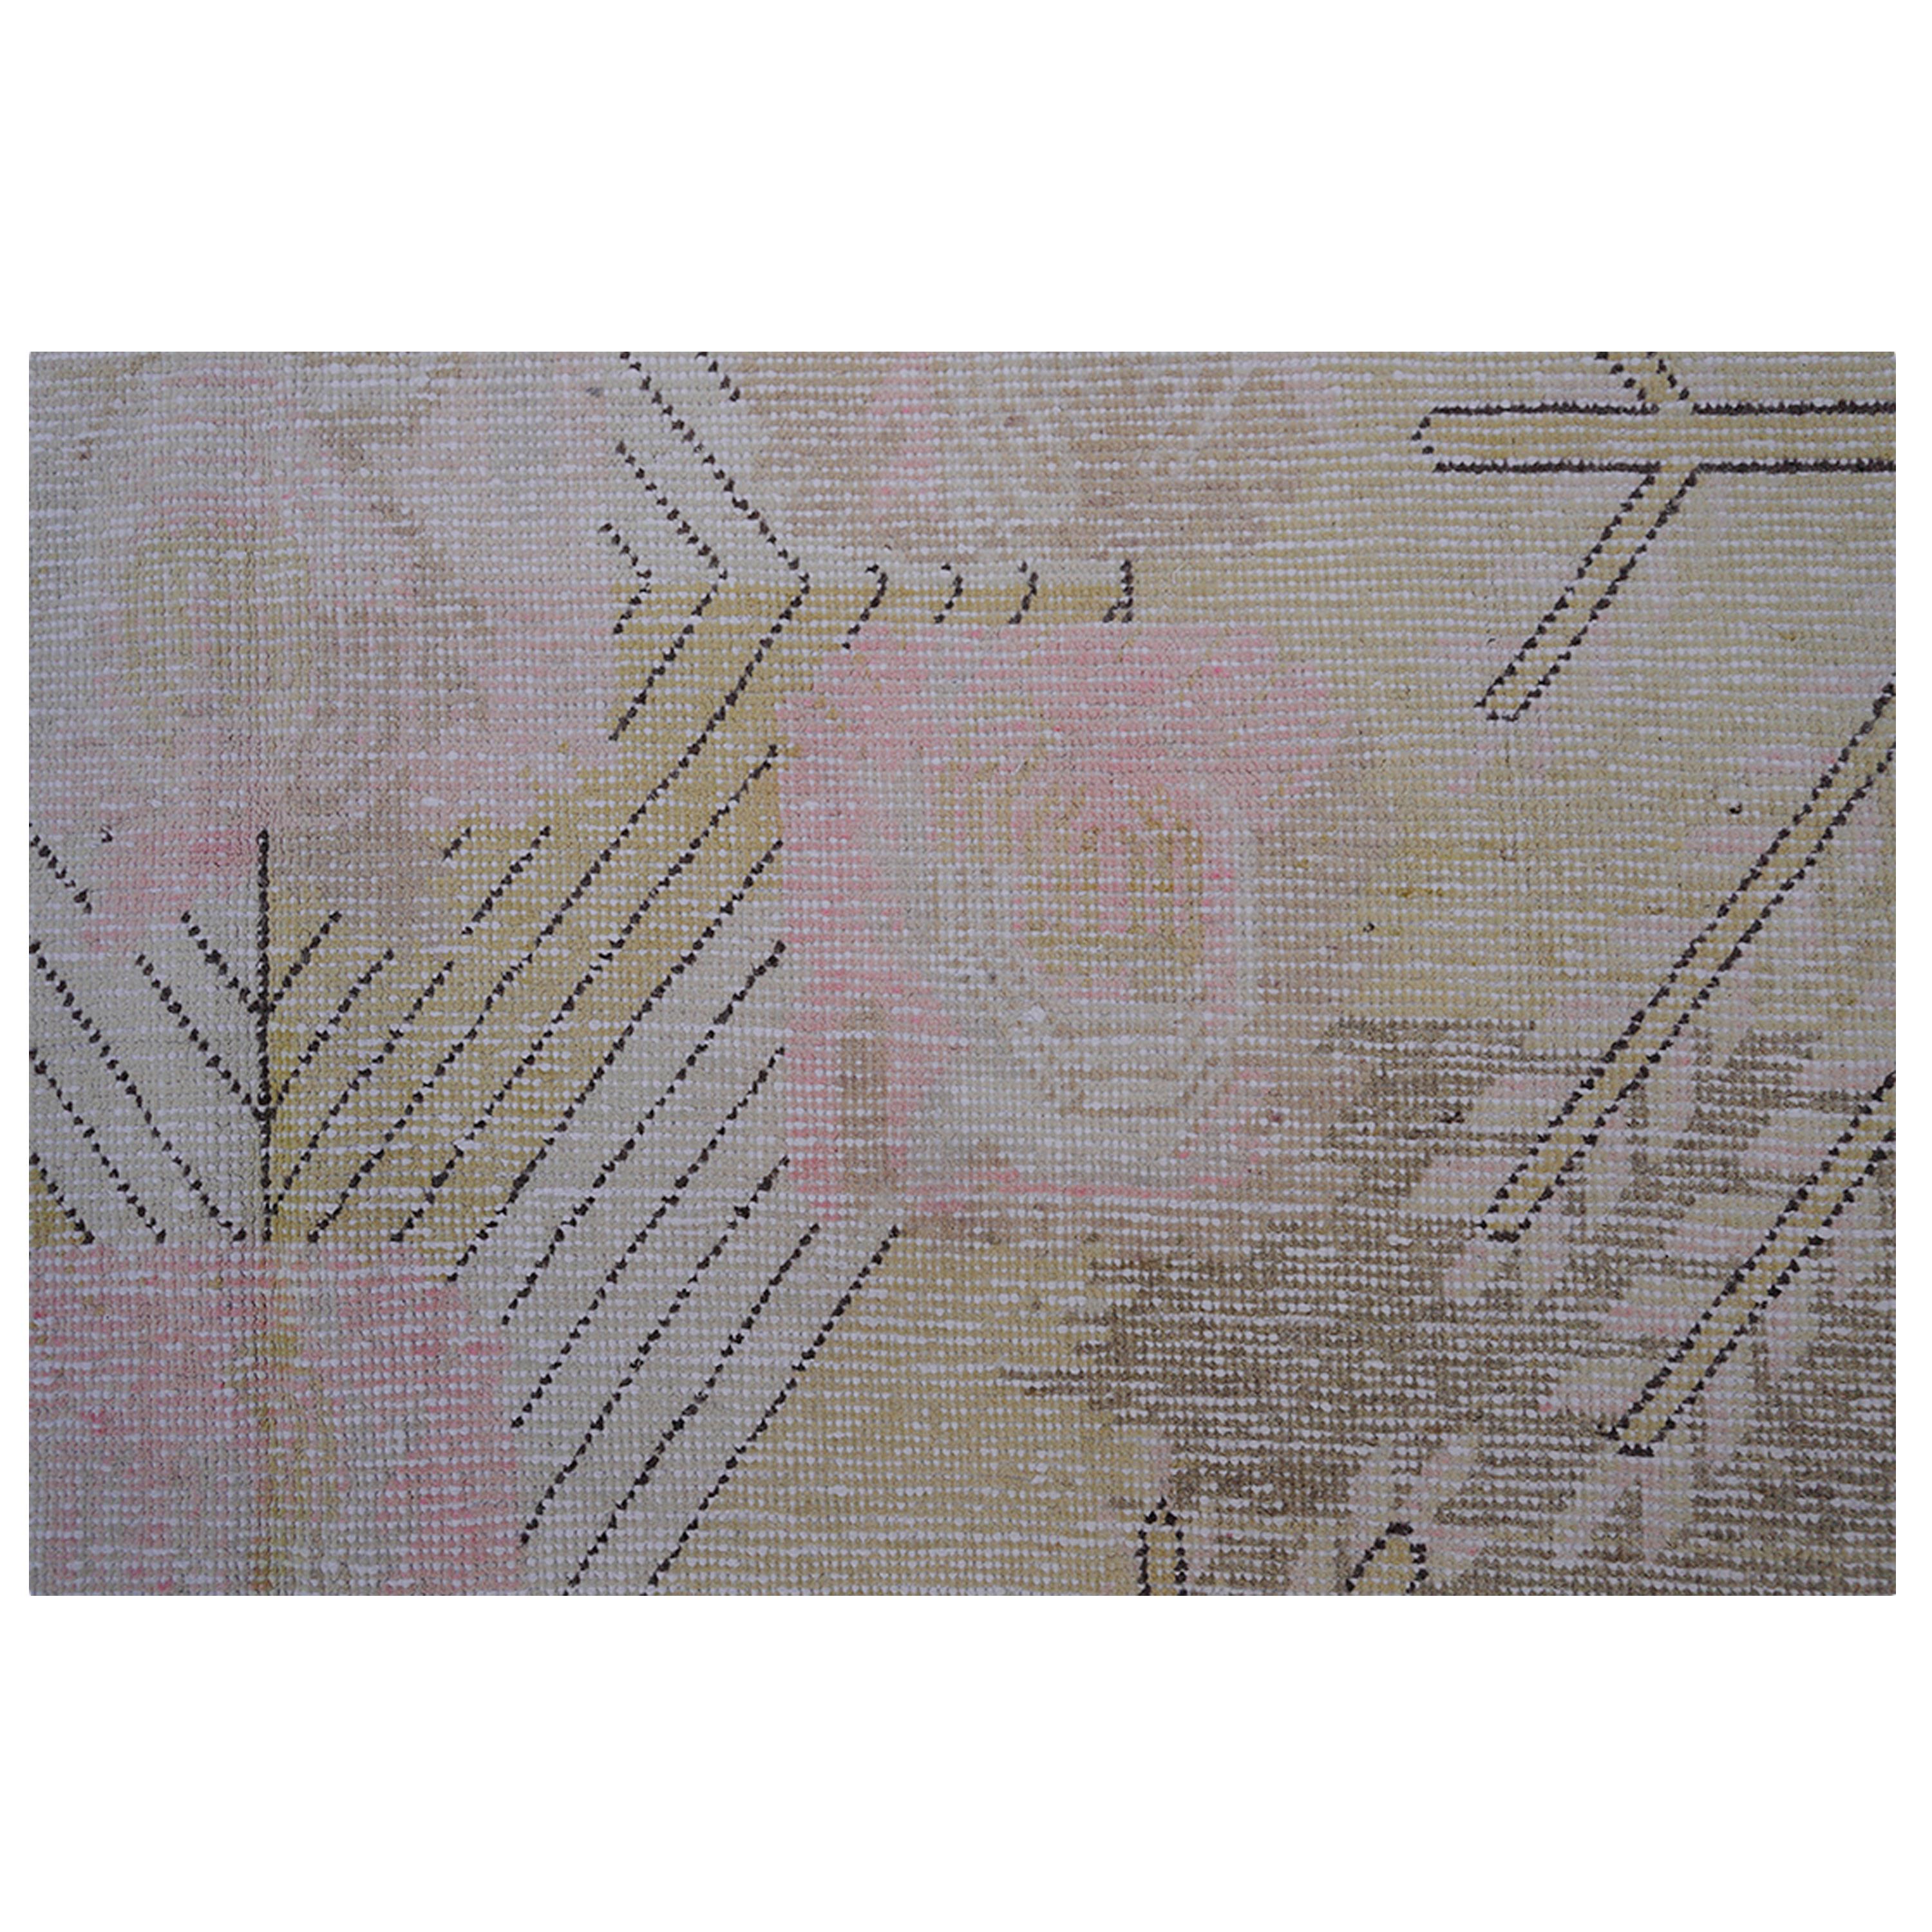 Sourced from the ancient Silk Road to bring a genuine one-of-a-kind rug to your home, this Grey and Pink Vintage Wool Cotton Blend Rug - 5'6